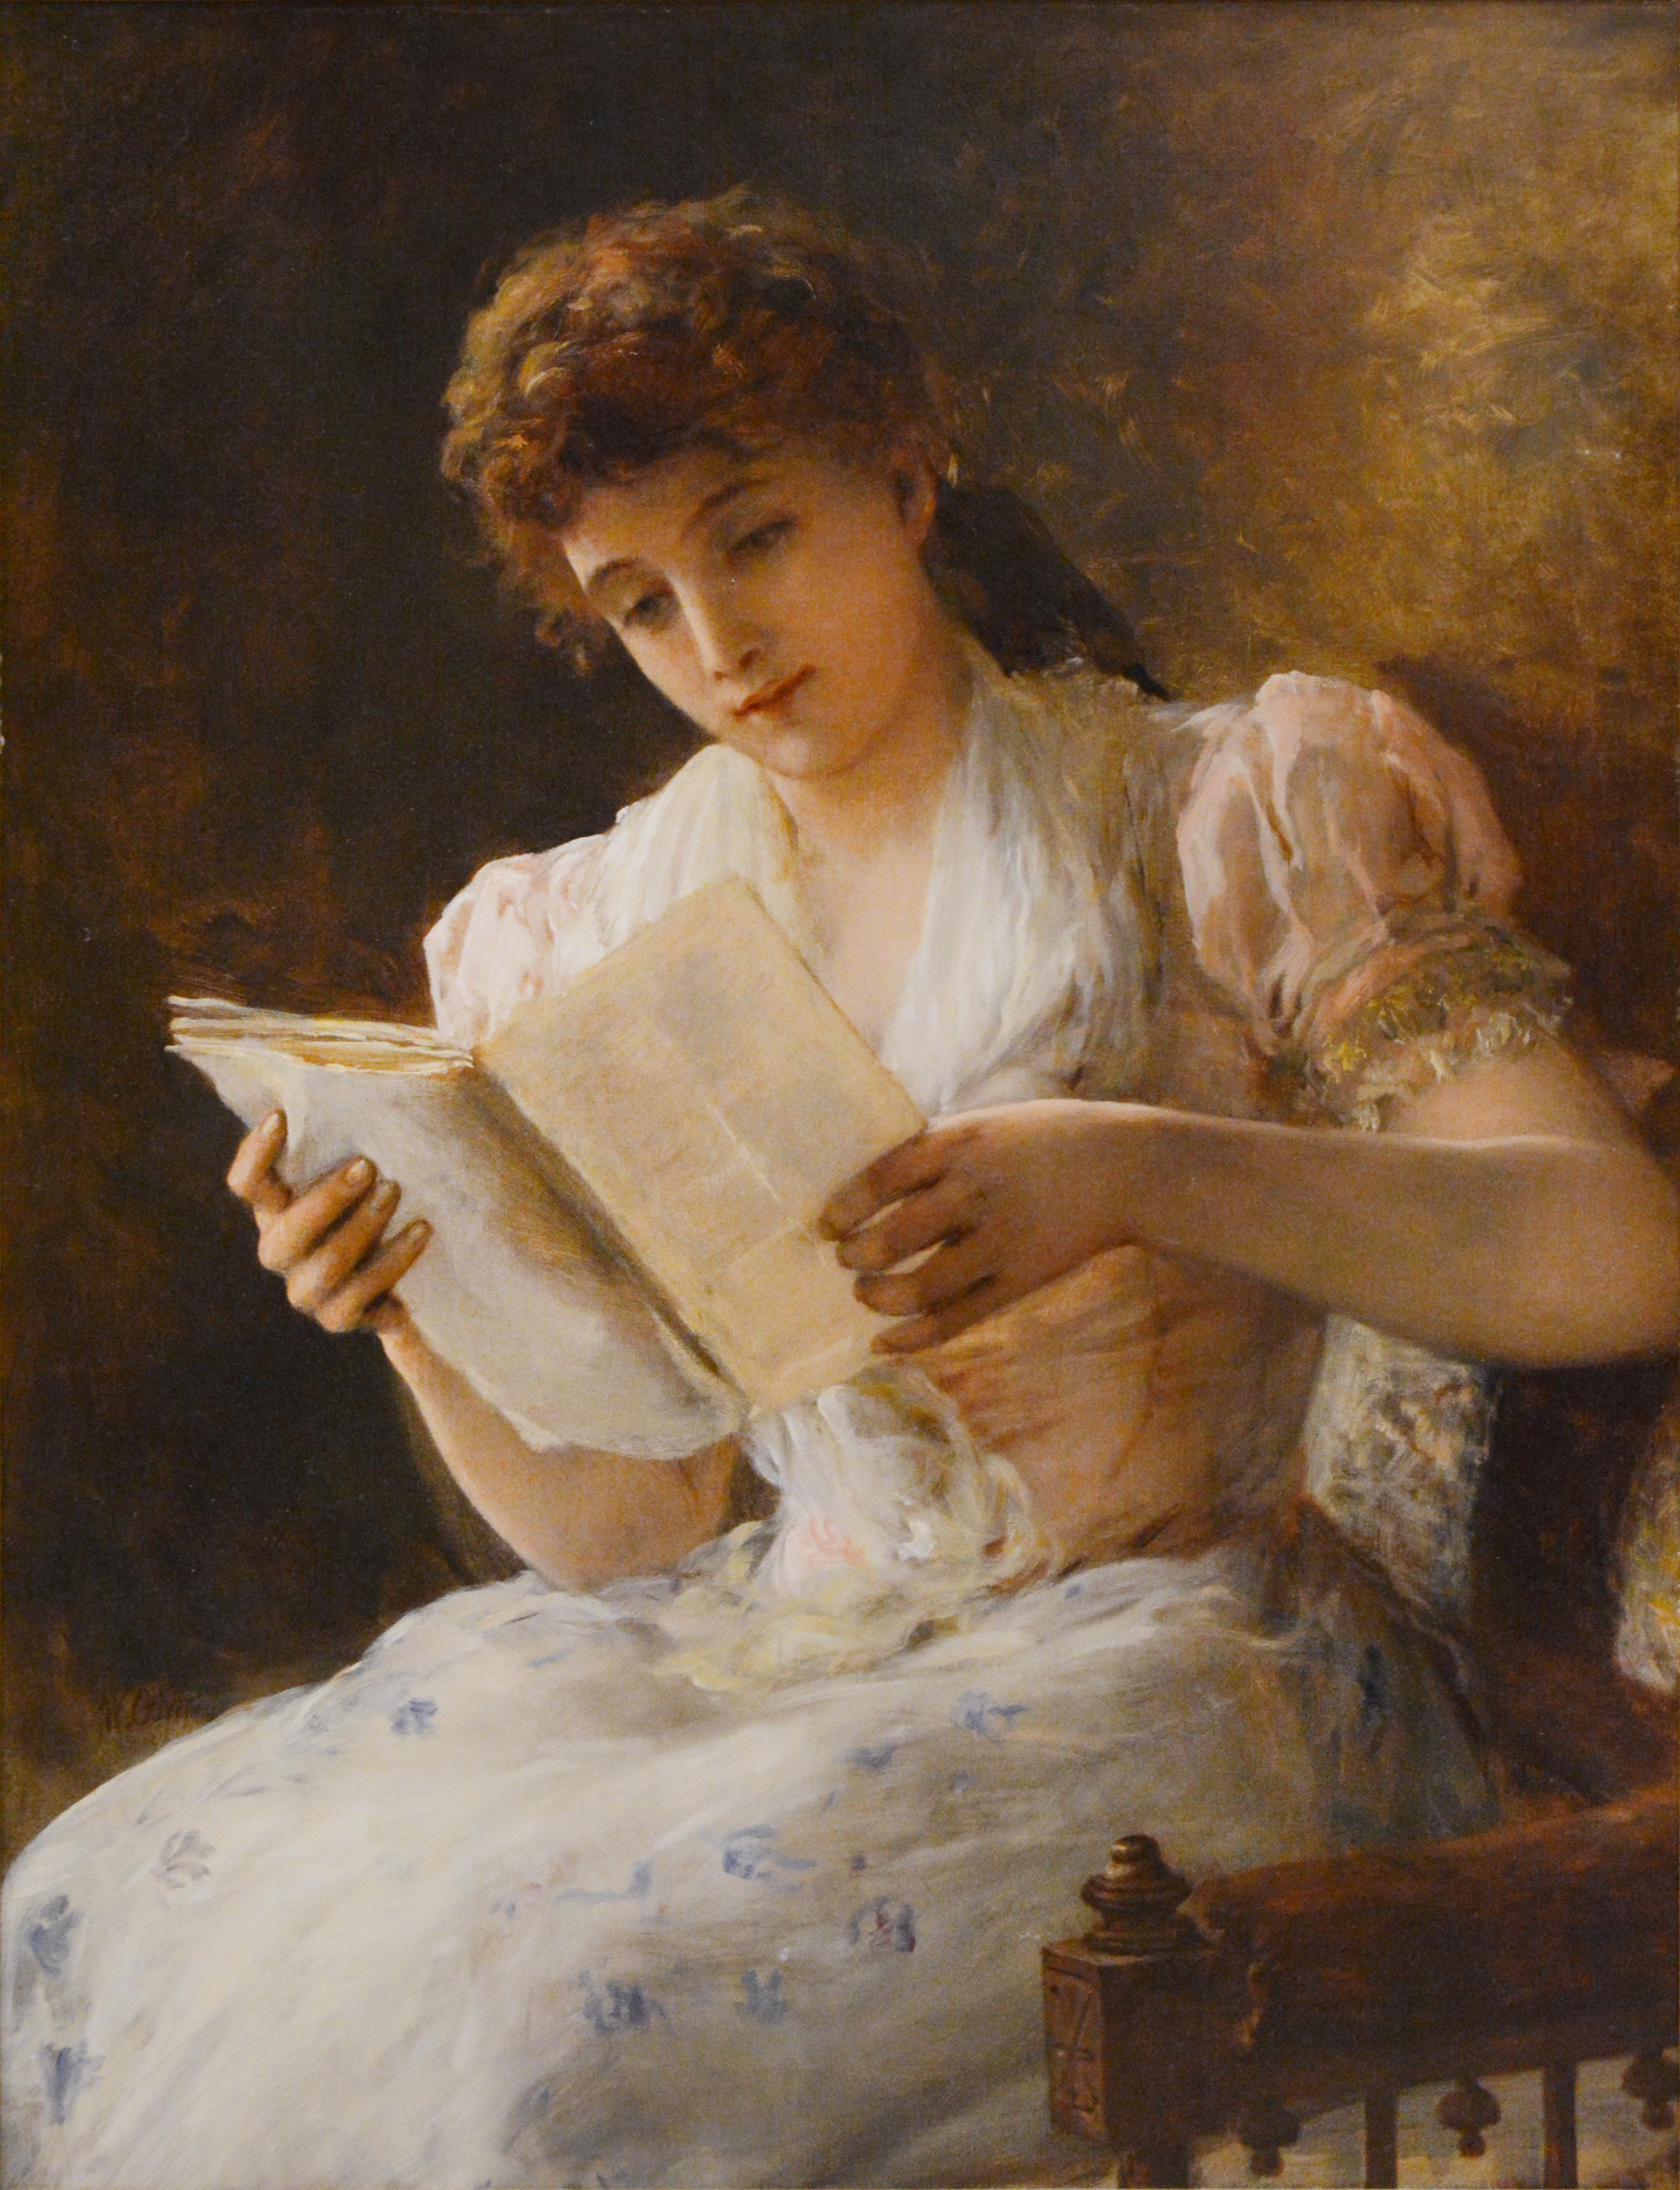 William Oliver Figurative Painting - 19th Century Academic Portrait of a Woman, "Woman reading a Book"